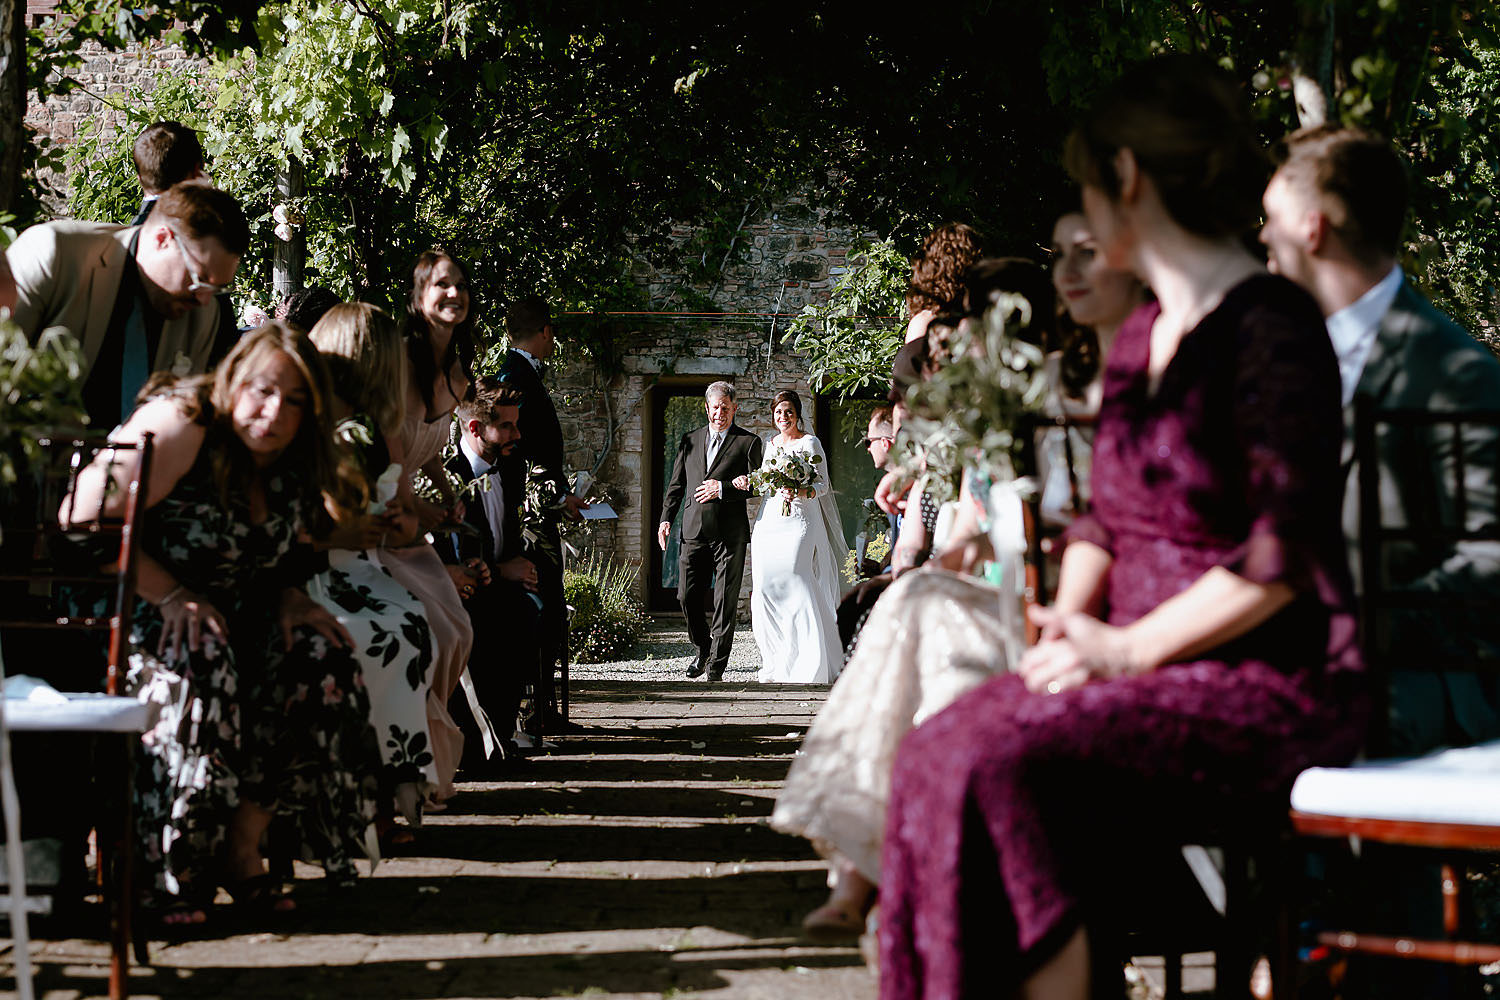 relaxing countryside wedding in tuscany outdoor romantic wedding ceremony